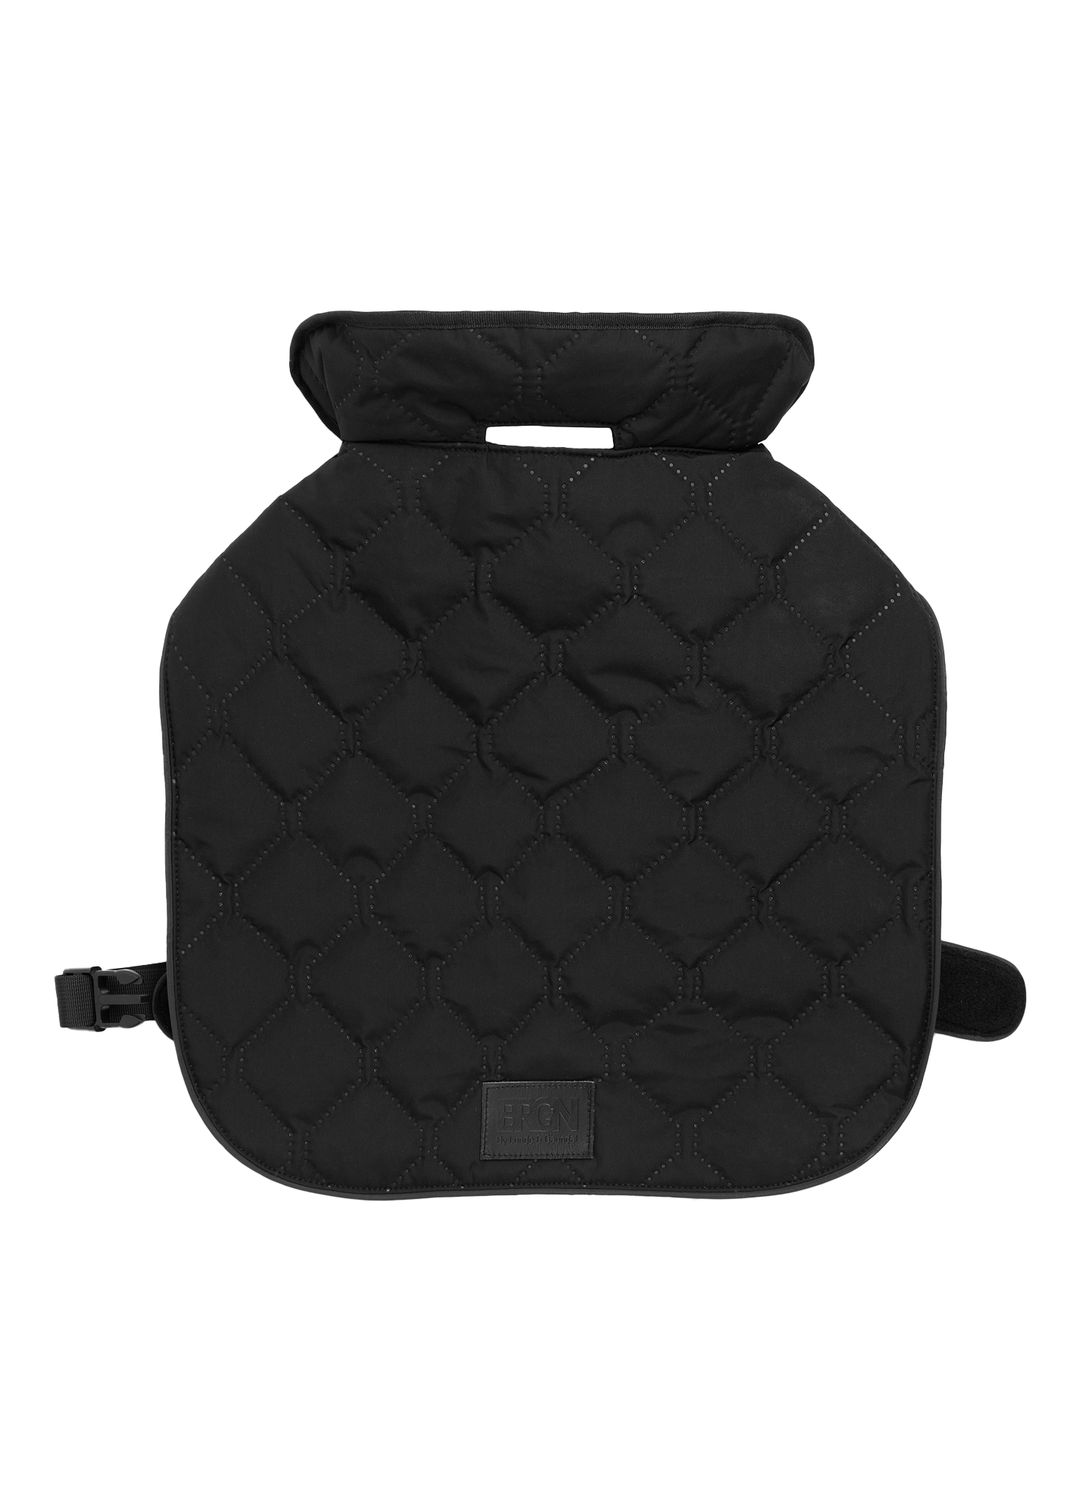 BRGN by Lunde & Gaundal Dog Coat Accessories 095 New Black